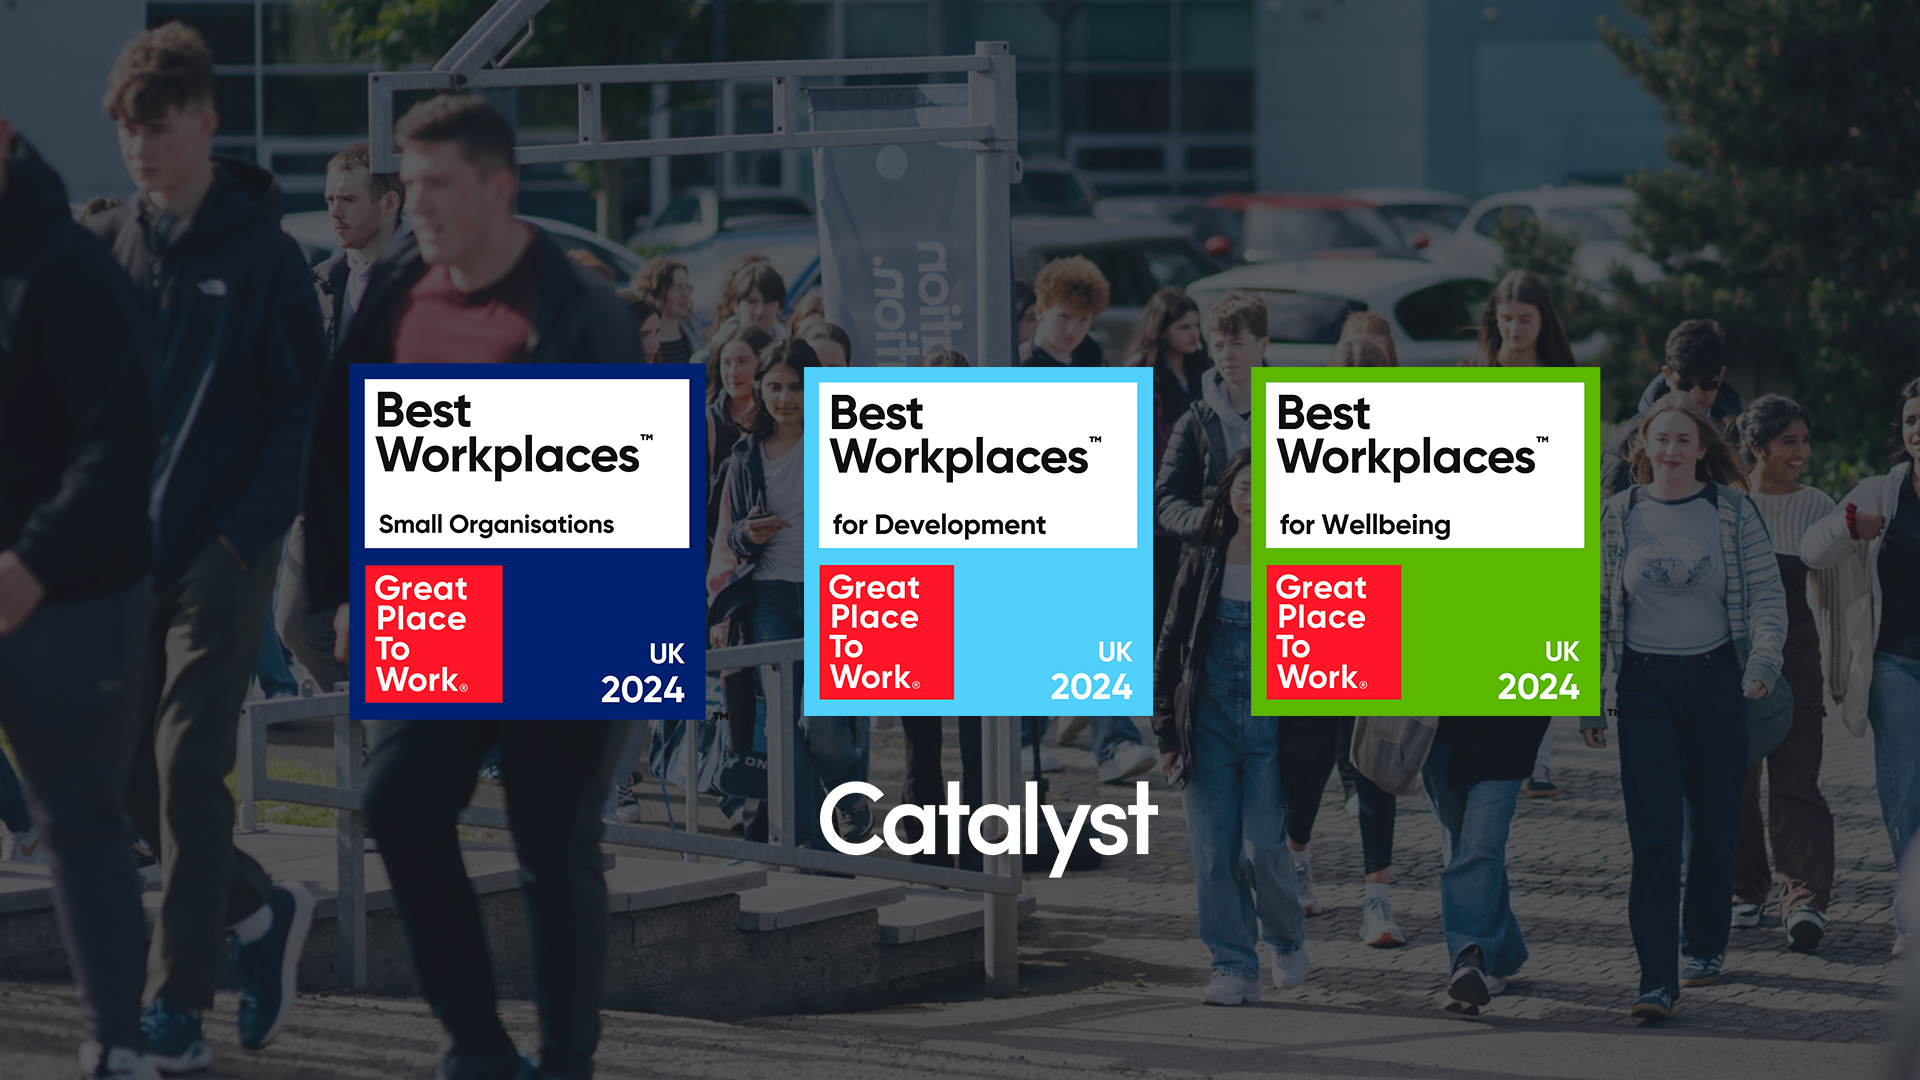 Catalyst named as one of the UK’s Best Workplaces 2024